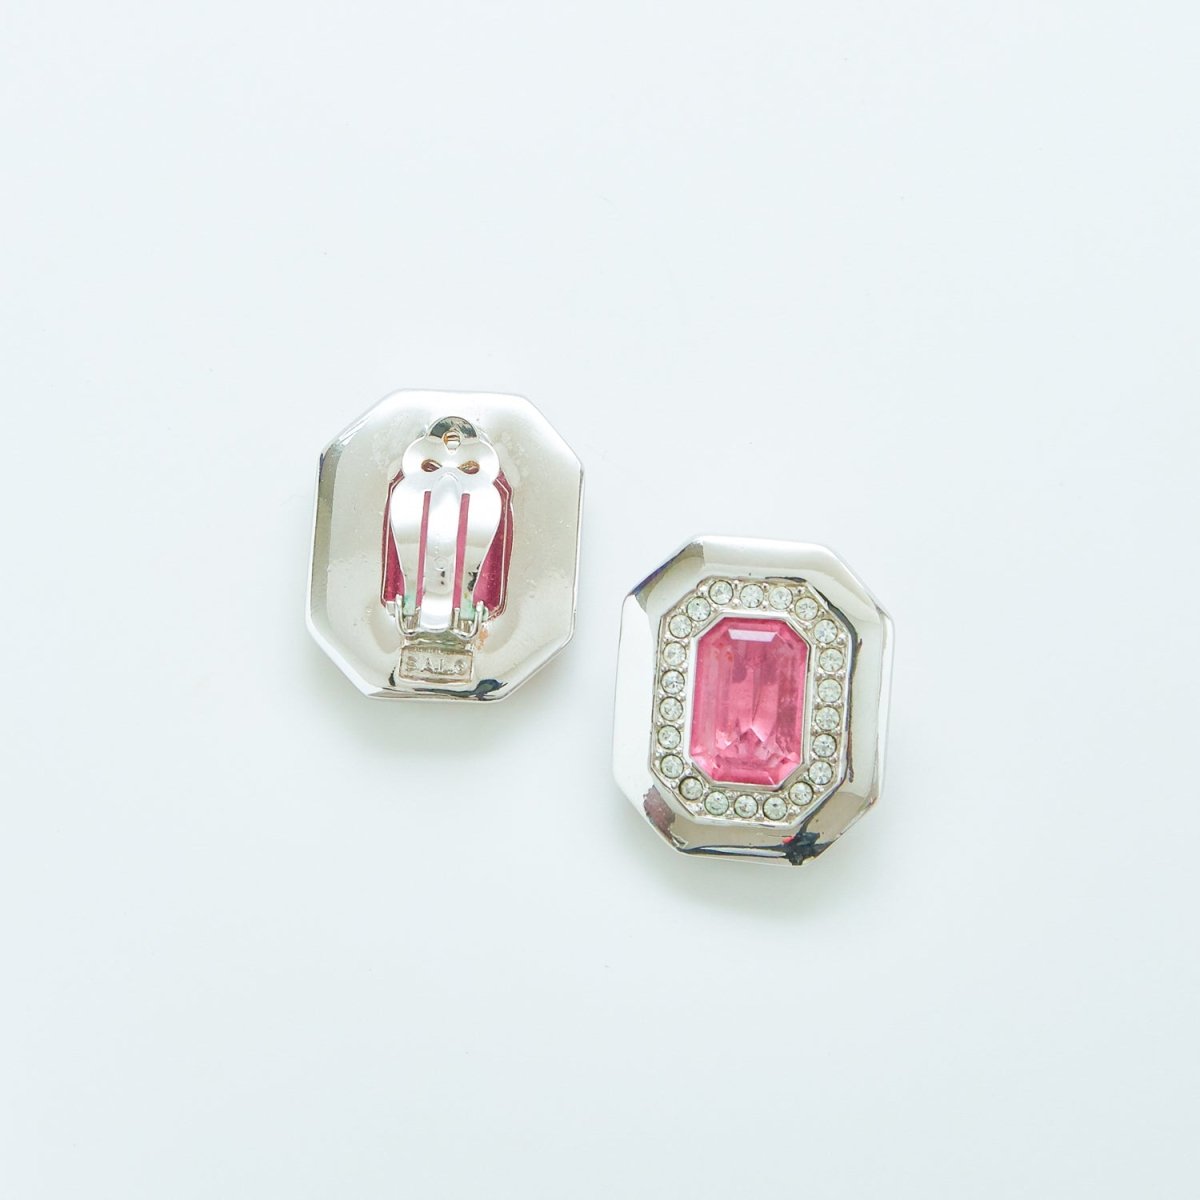 Vintage Swarovski Silver and Pink Earrings - Admiral Row